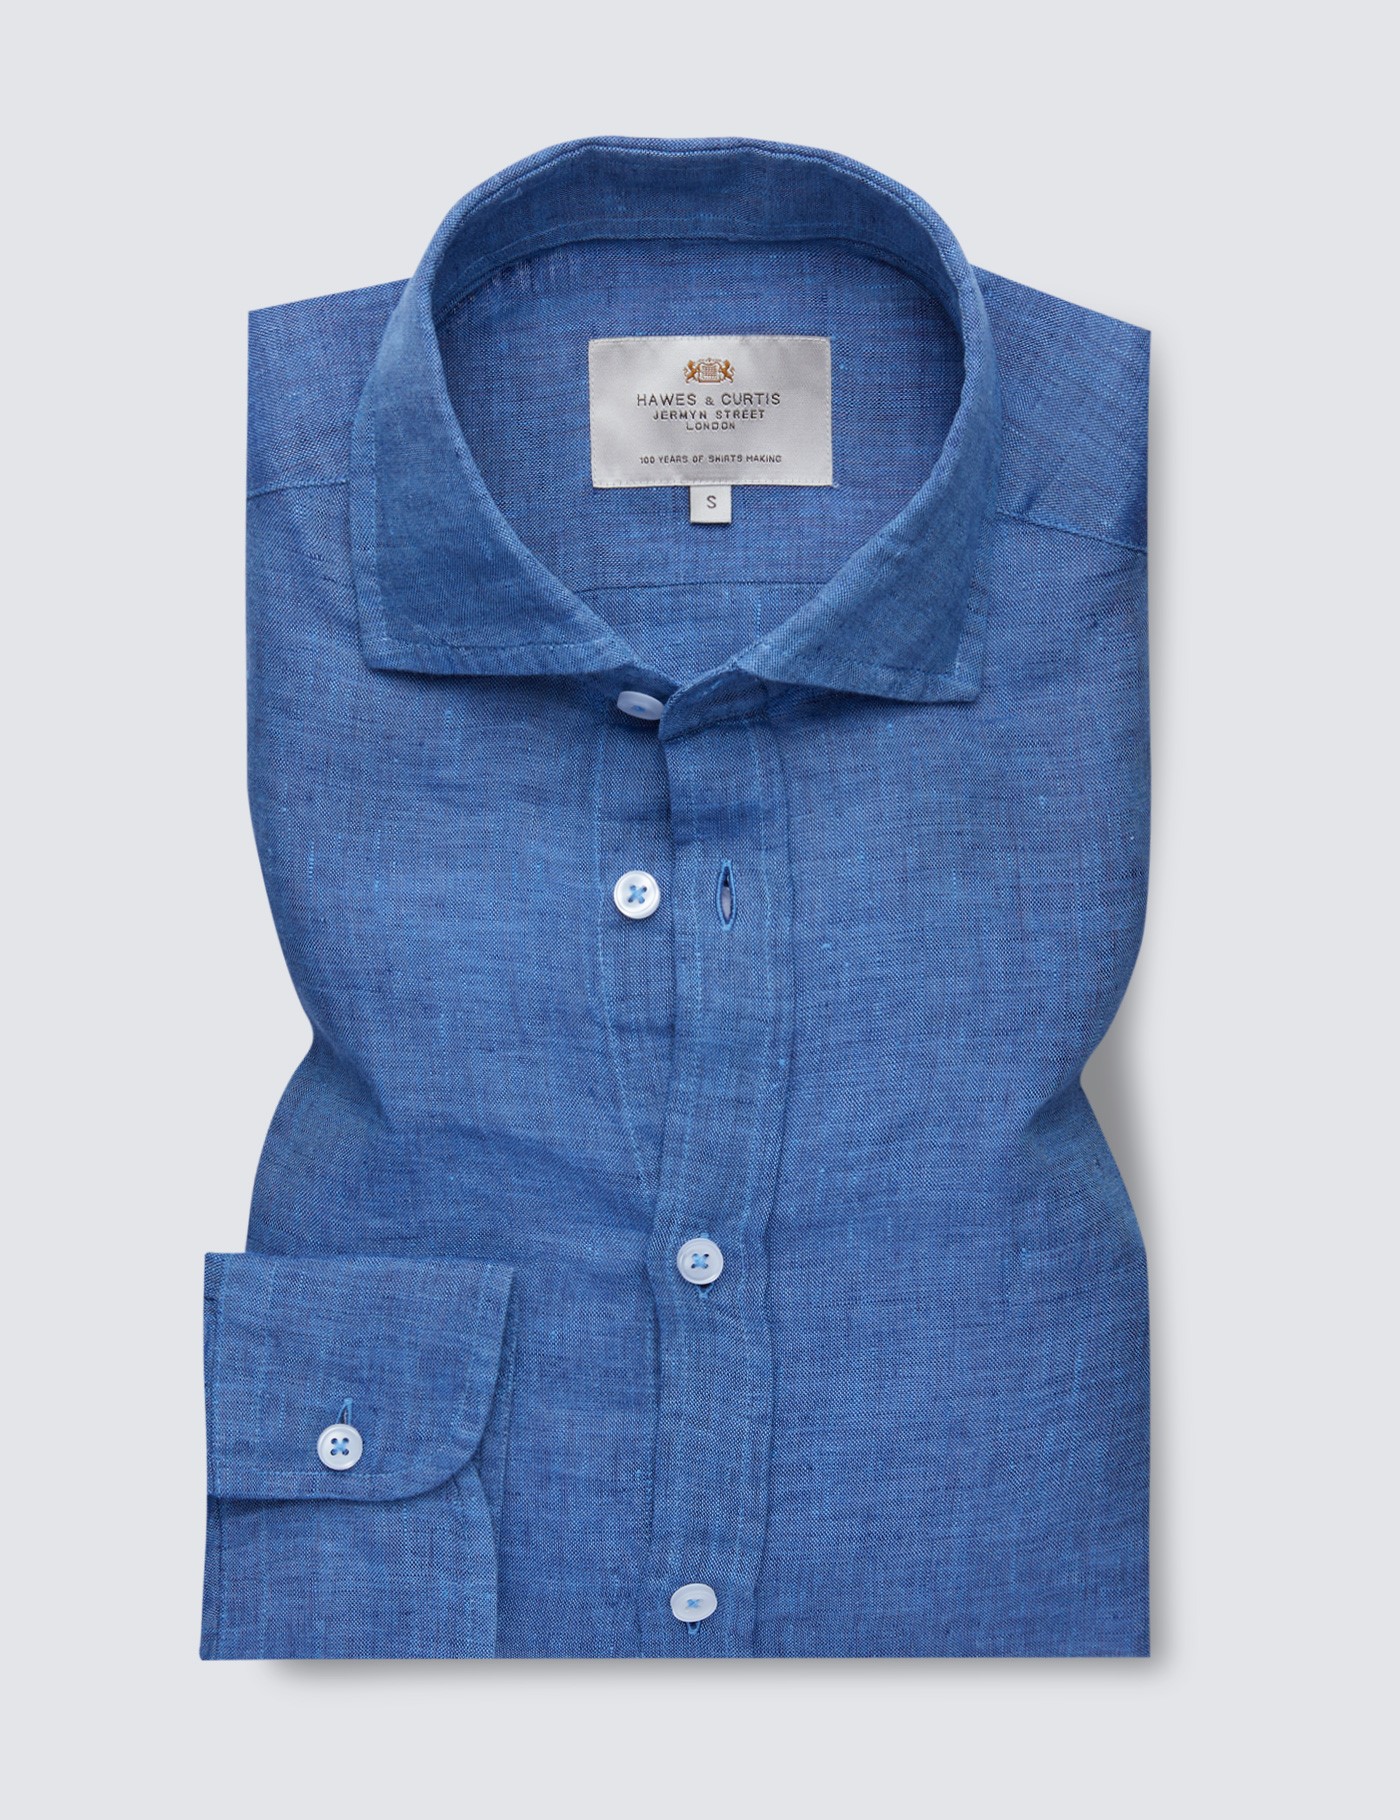 Linen Relaxed Slim Fit Shirt With Full Cutaway Collar And Single Cuffs In Denim Hawes And Curtis